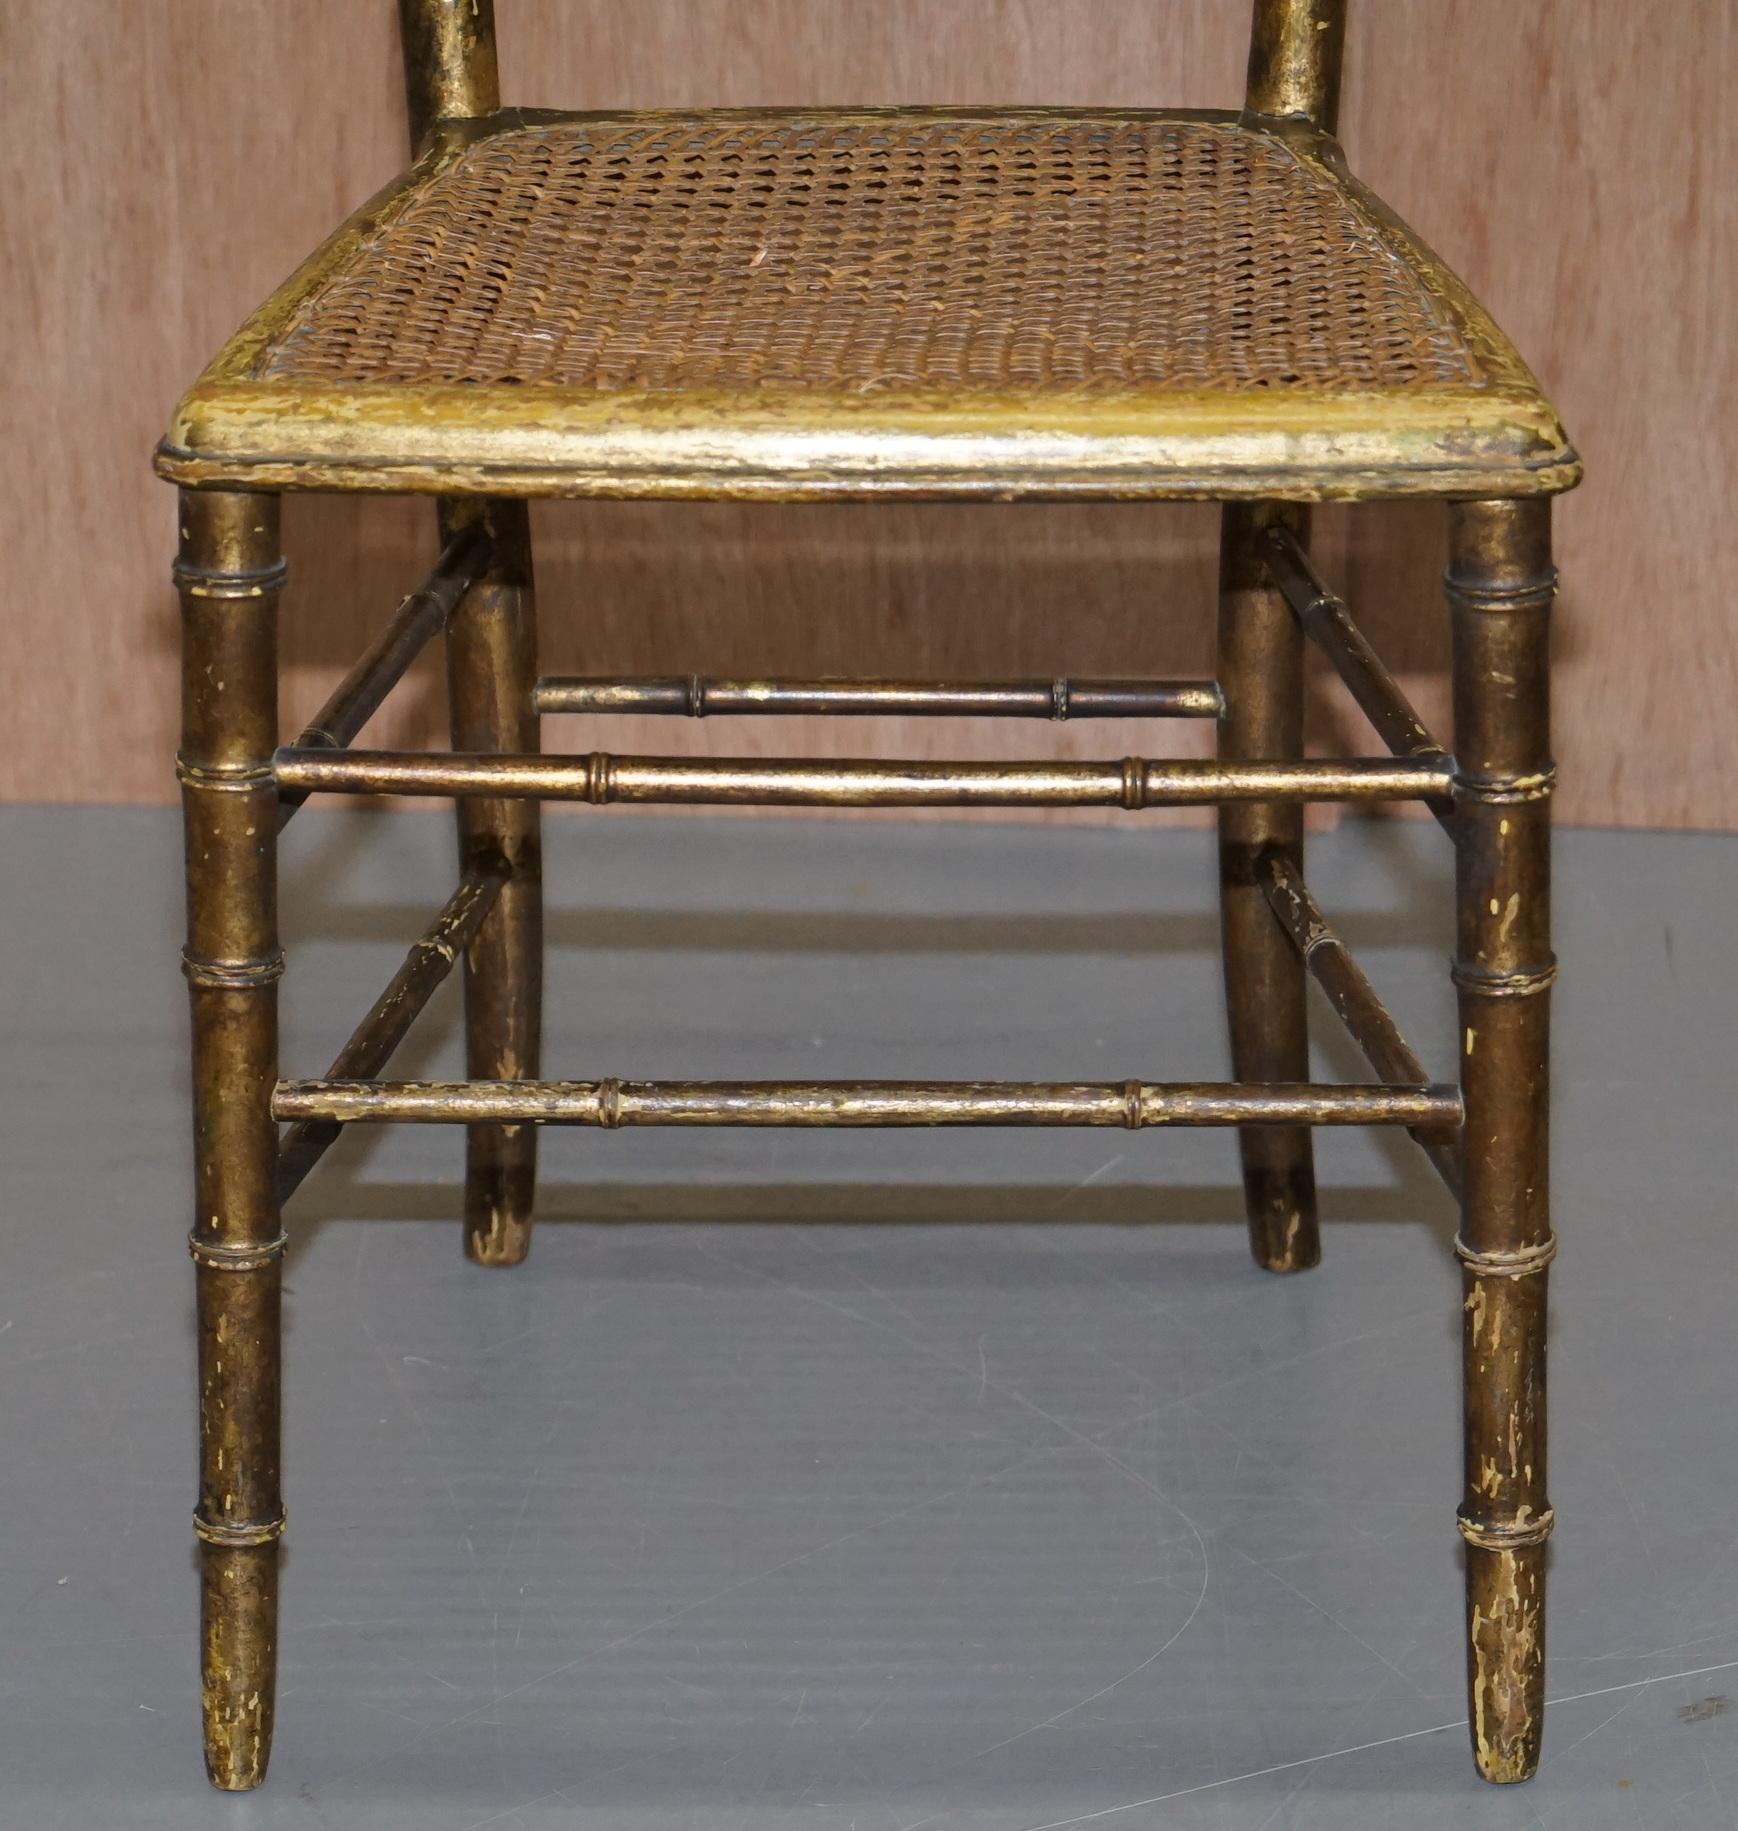 Pair of Original Giltwood Famboo Regency Bergere Chairs with Period Gold Gilding For Sale 14